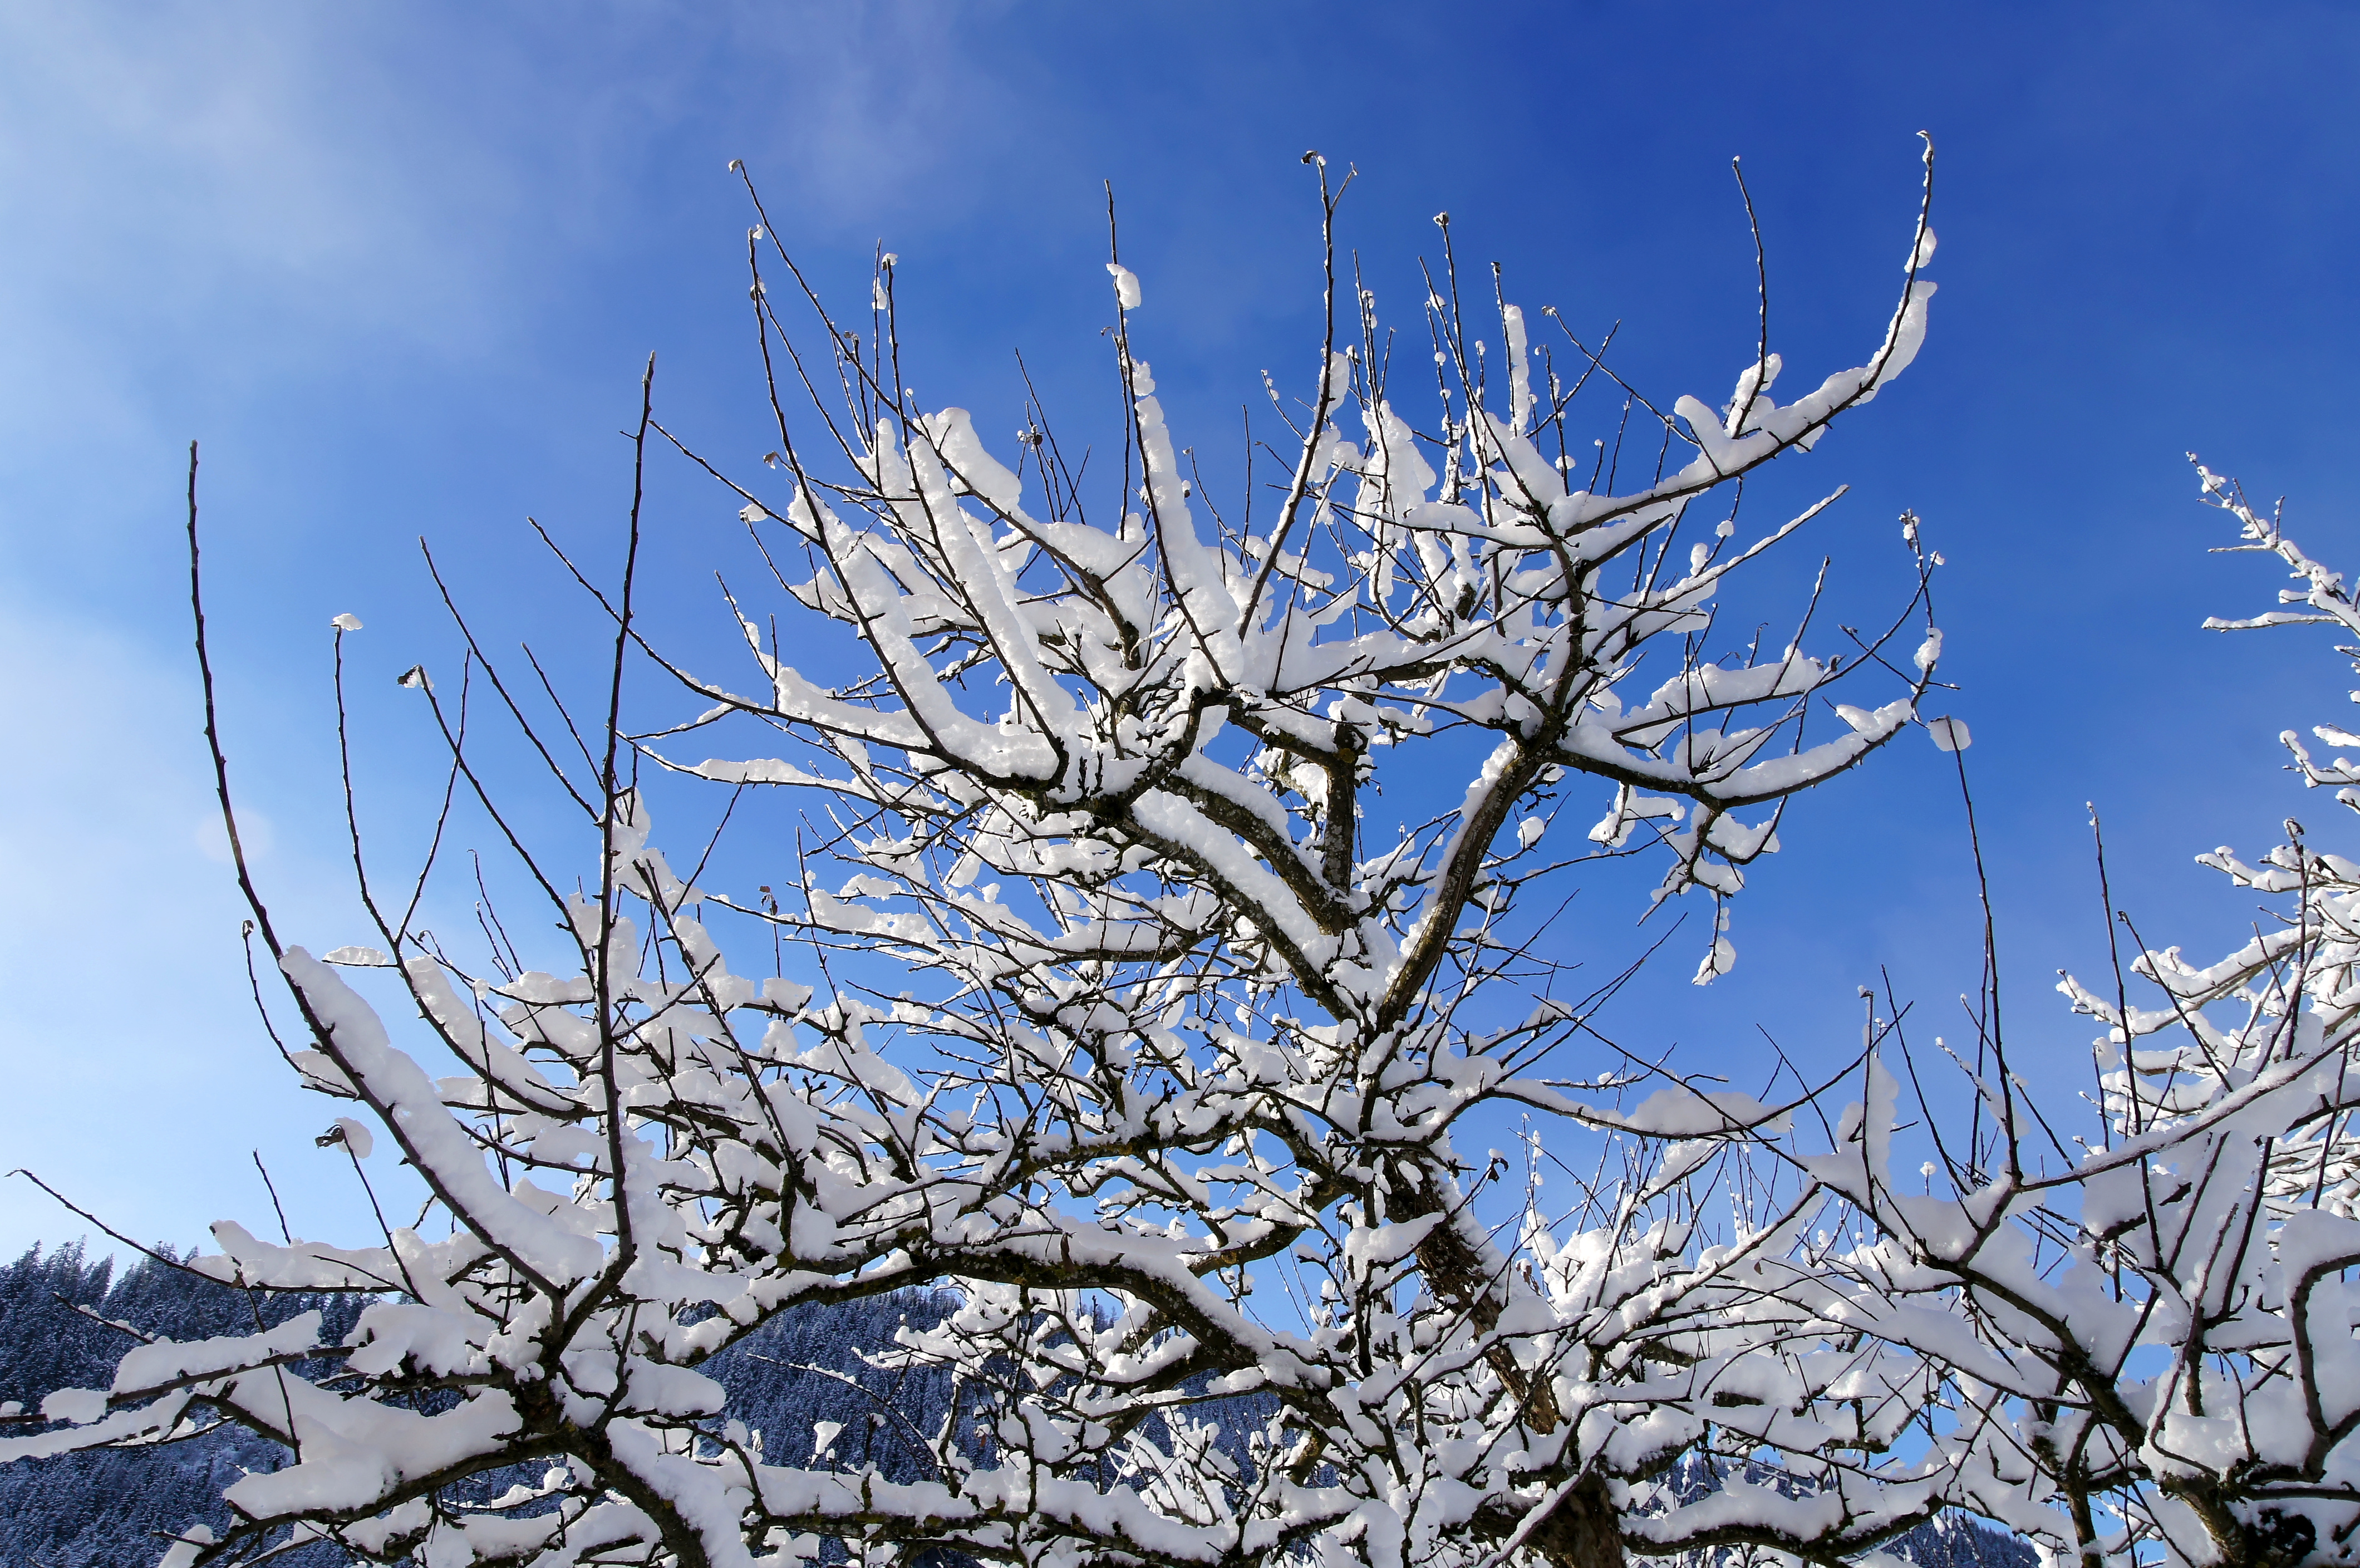 Snow on the branches of trees - Our Great Photos